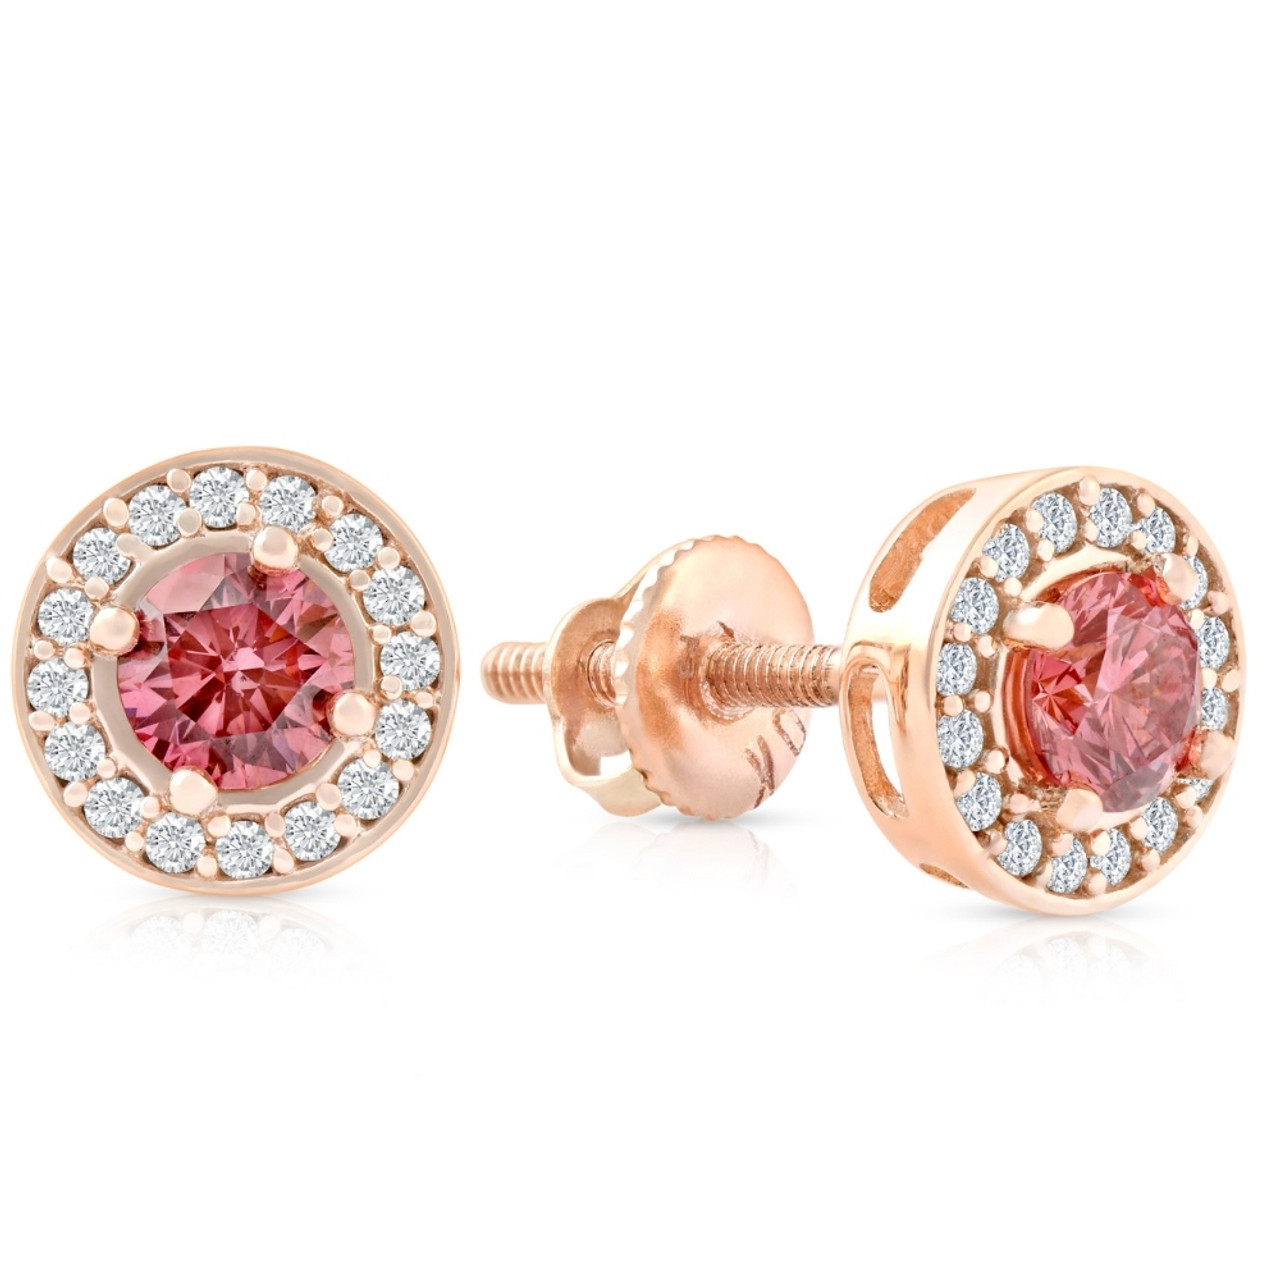 rose gold diamond and pink gemstone earrings